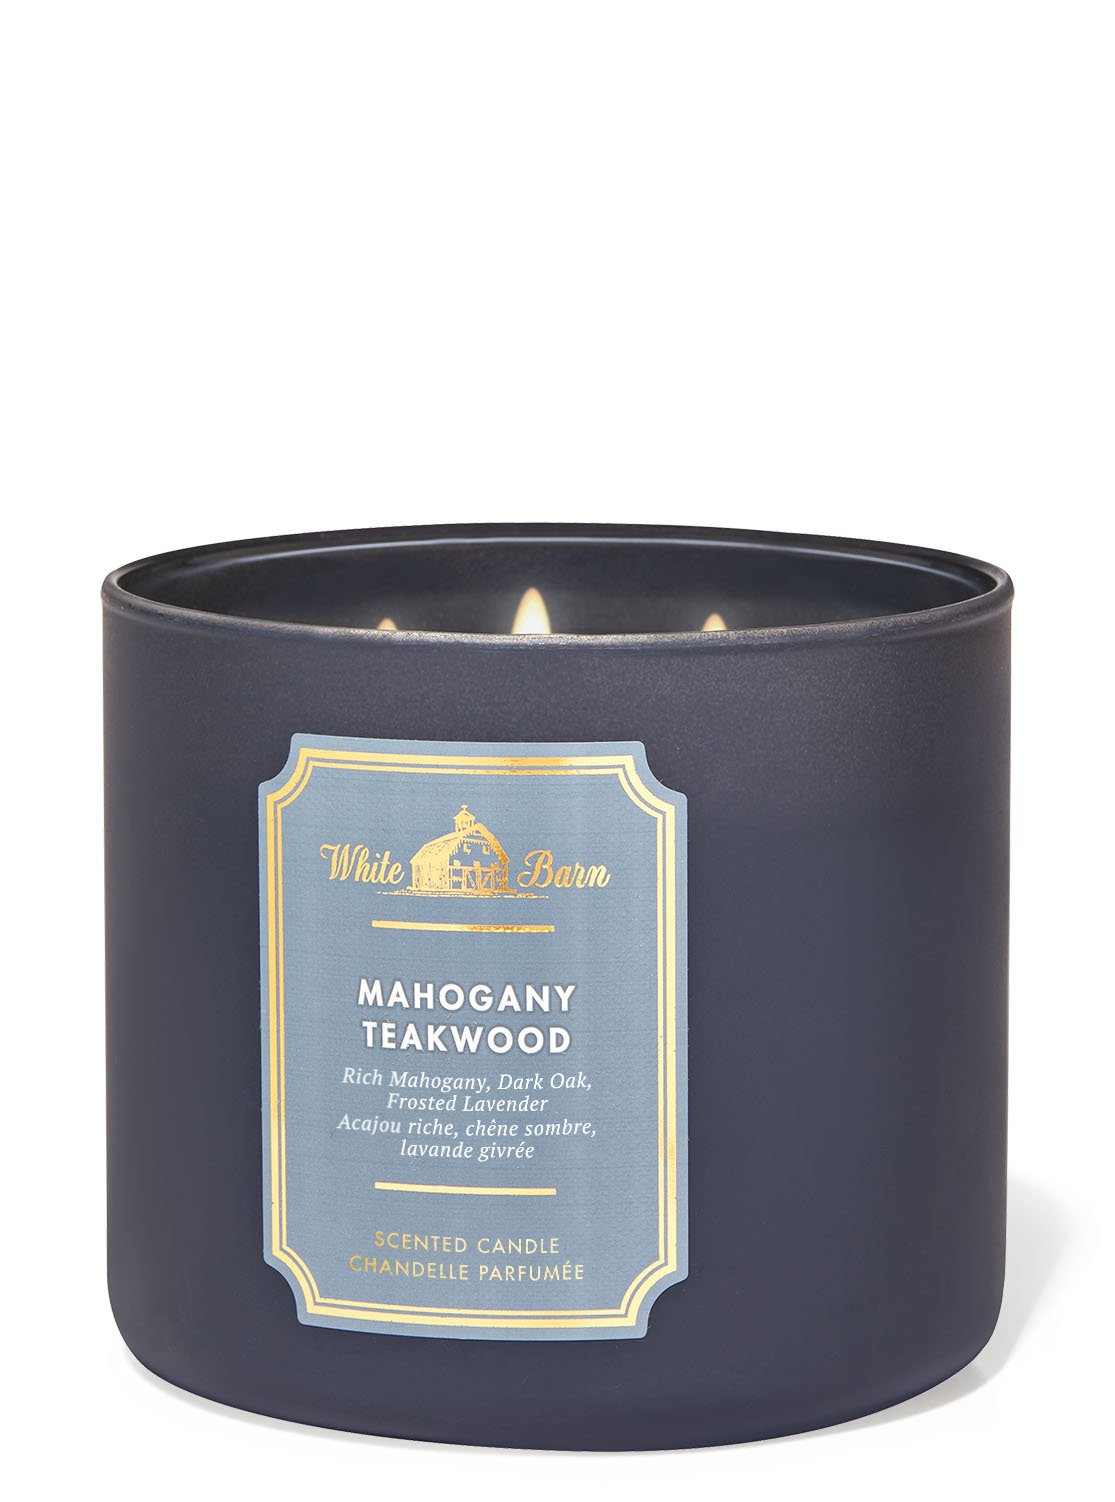 Scented Candles Fall Candles Mahogany Teakwood Candle Holiday Gift Soy Candles